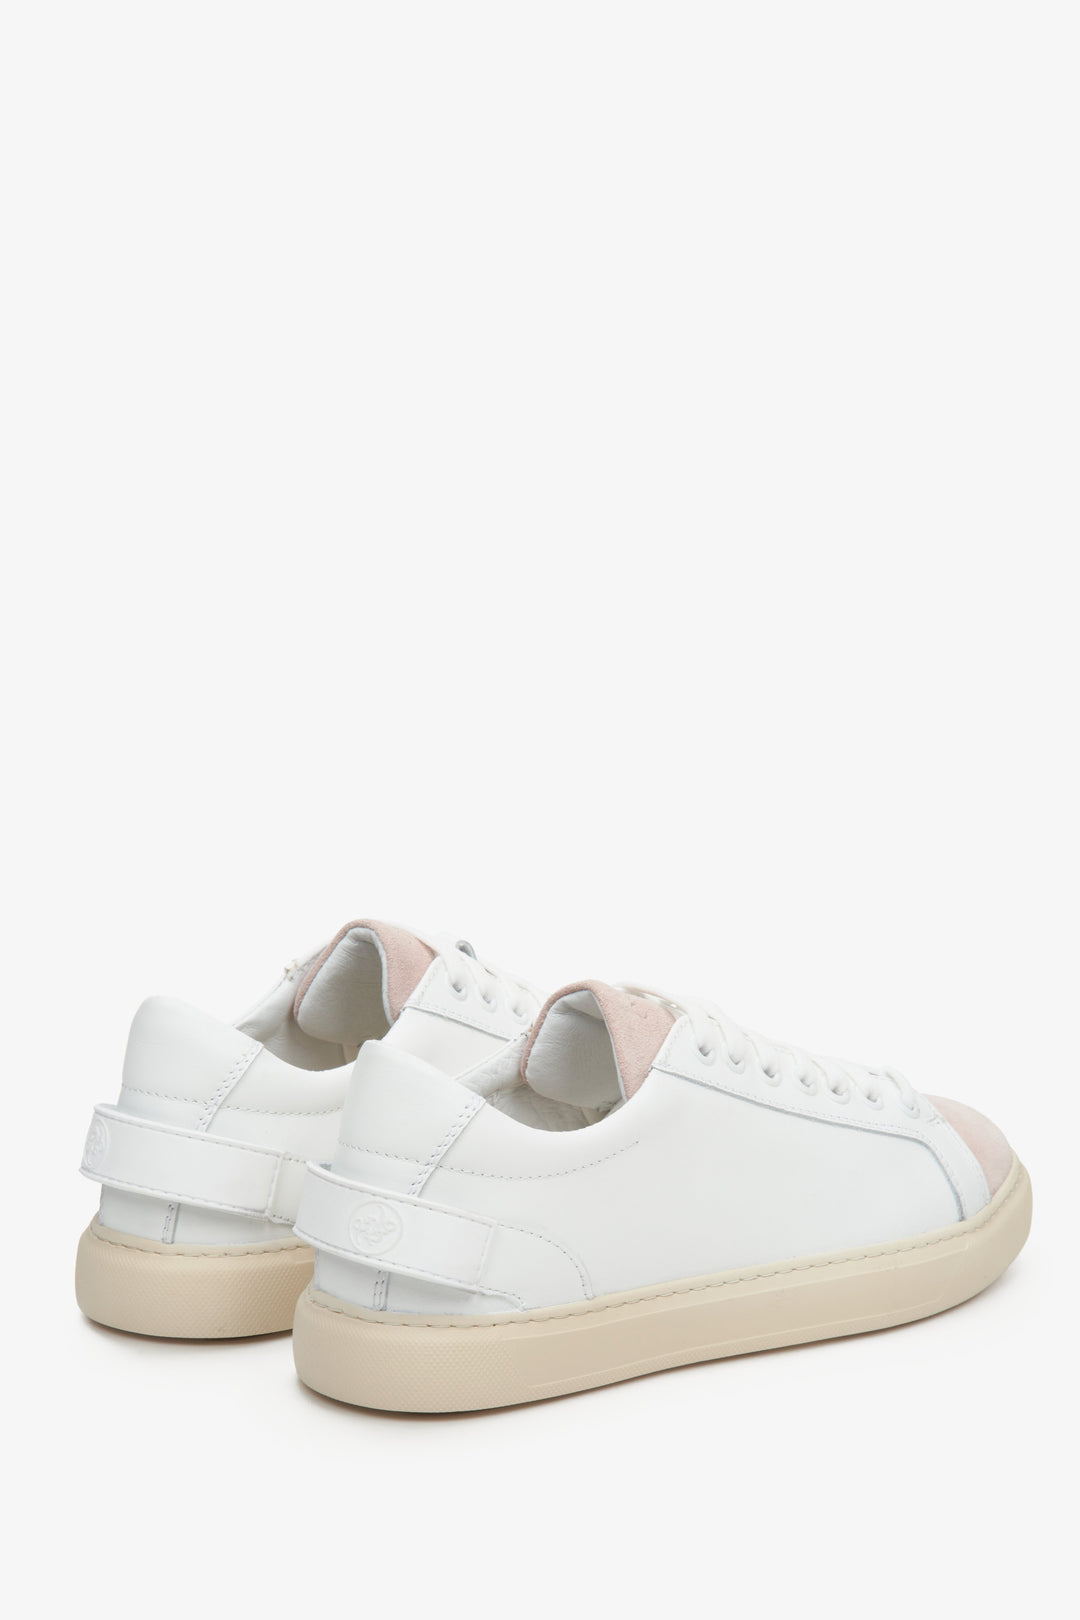 White and pink leather women's sneakers by Estro - close-up on the heel and side seam.